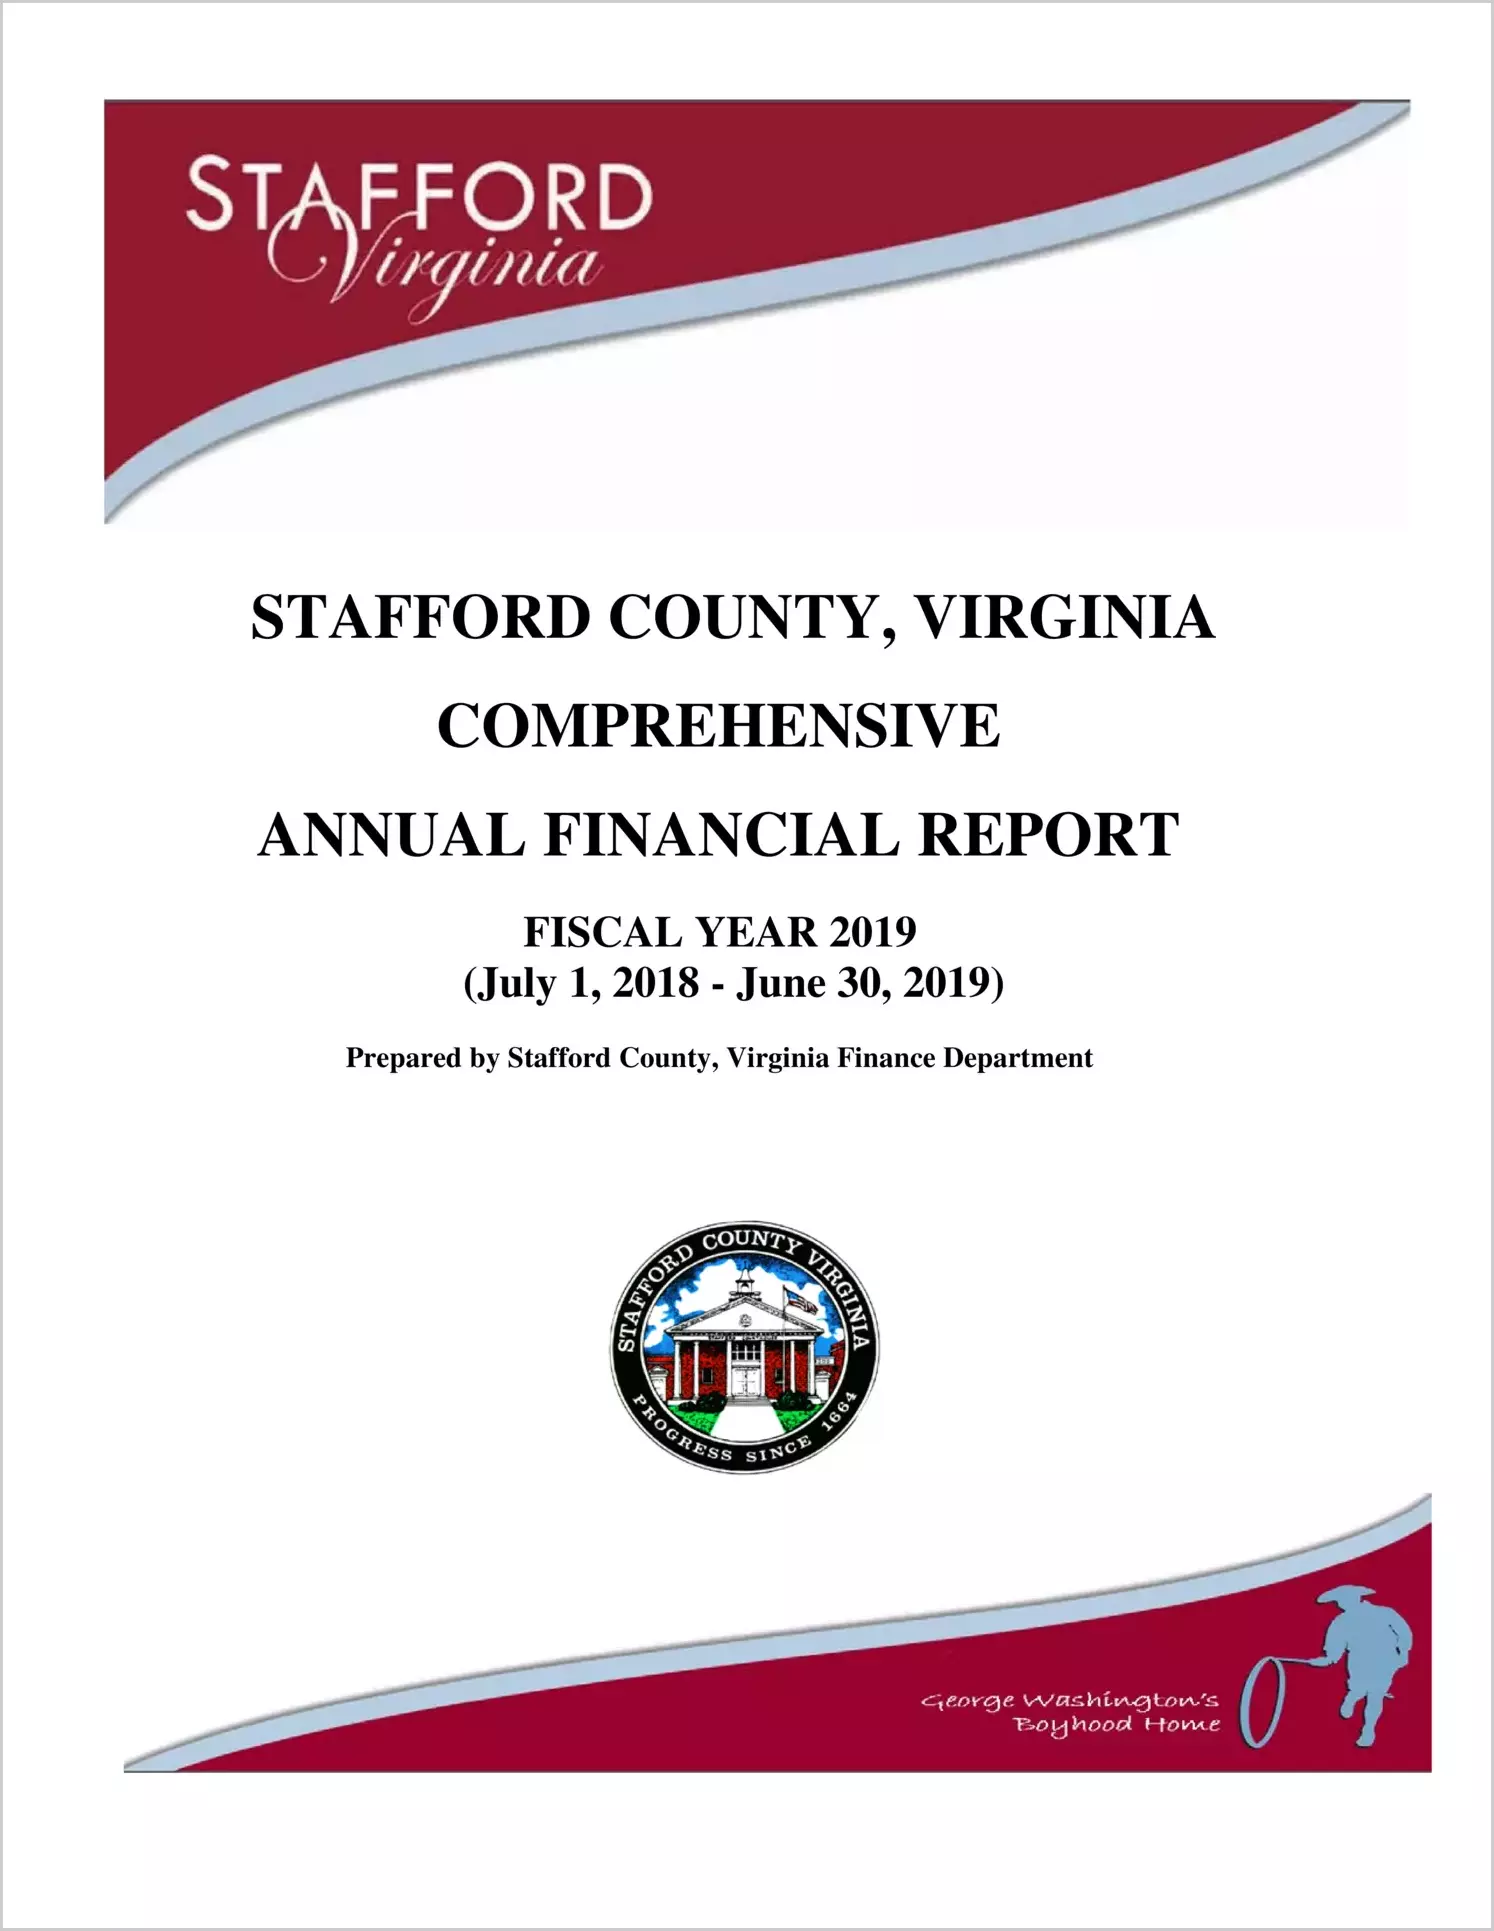 2019 Annual Financial Report for County of Stafford